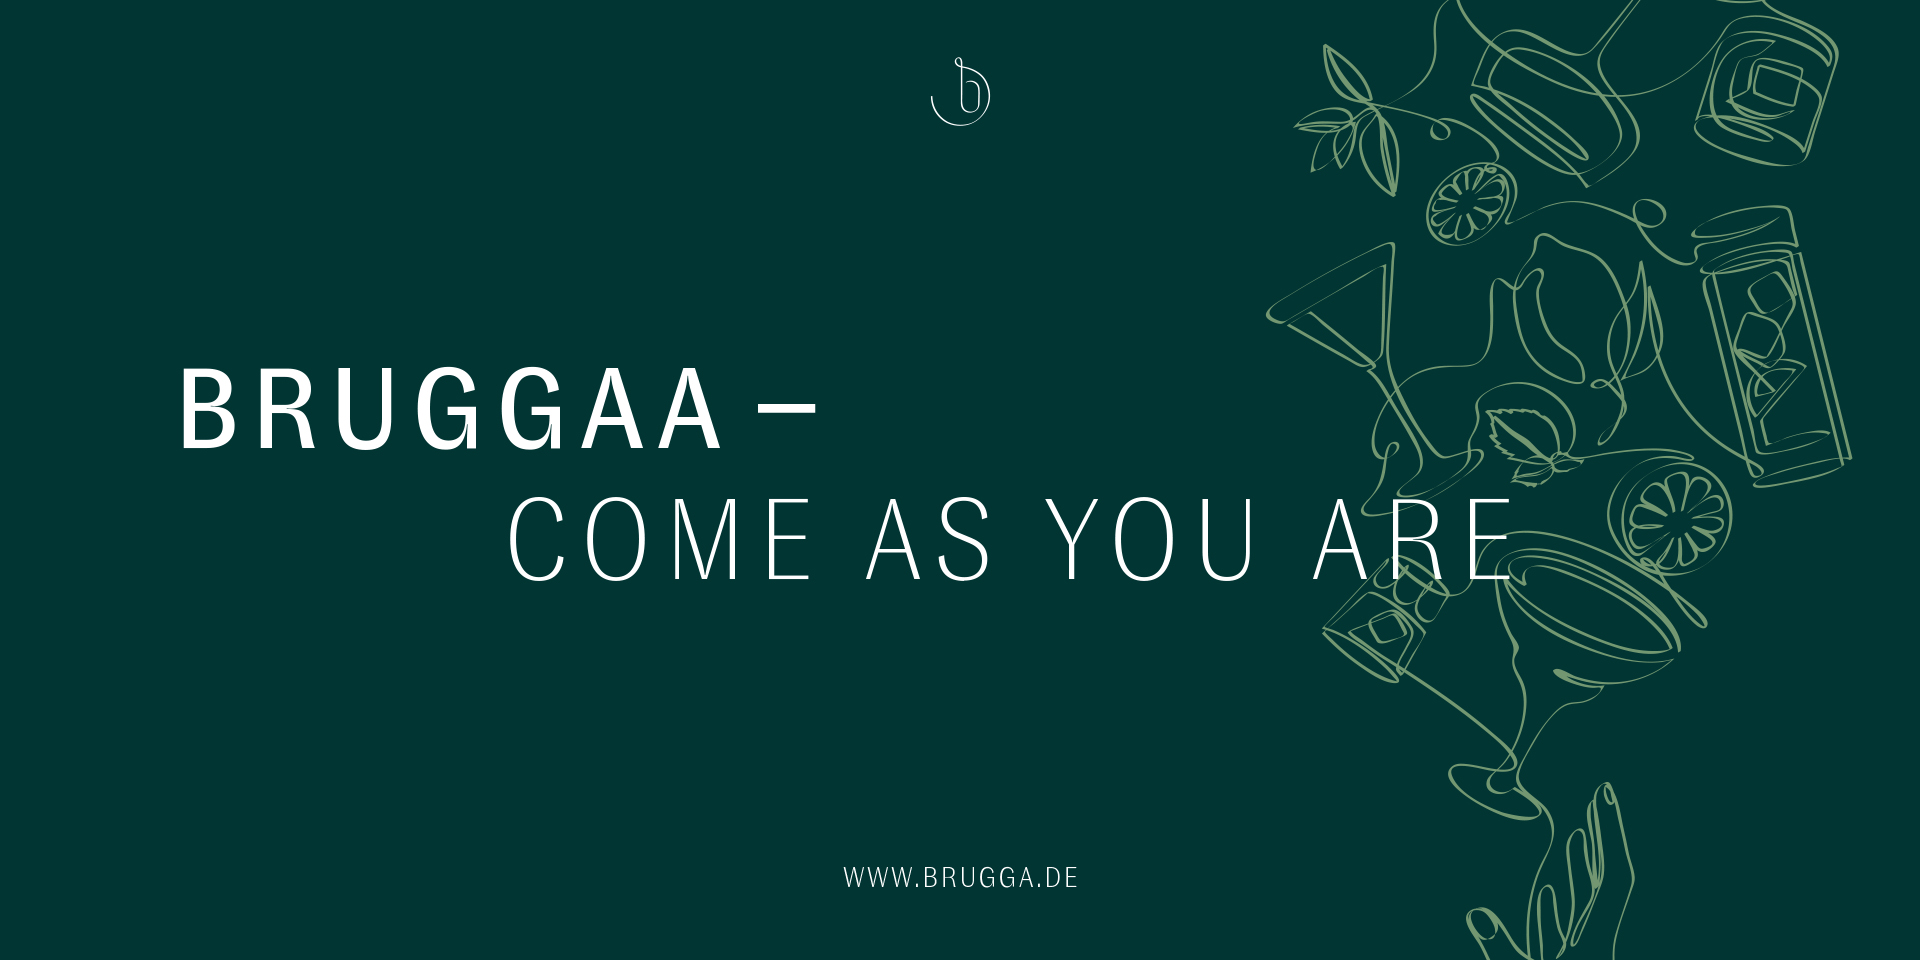 Ad design for bruggaa with continuous line illustration about drinks